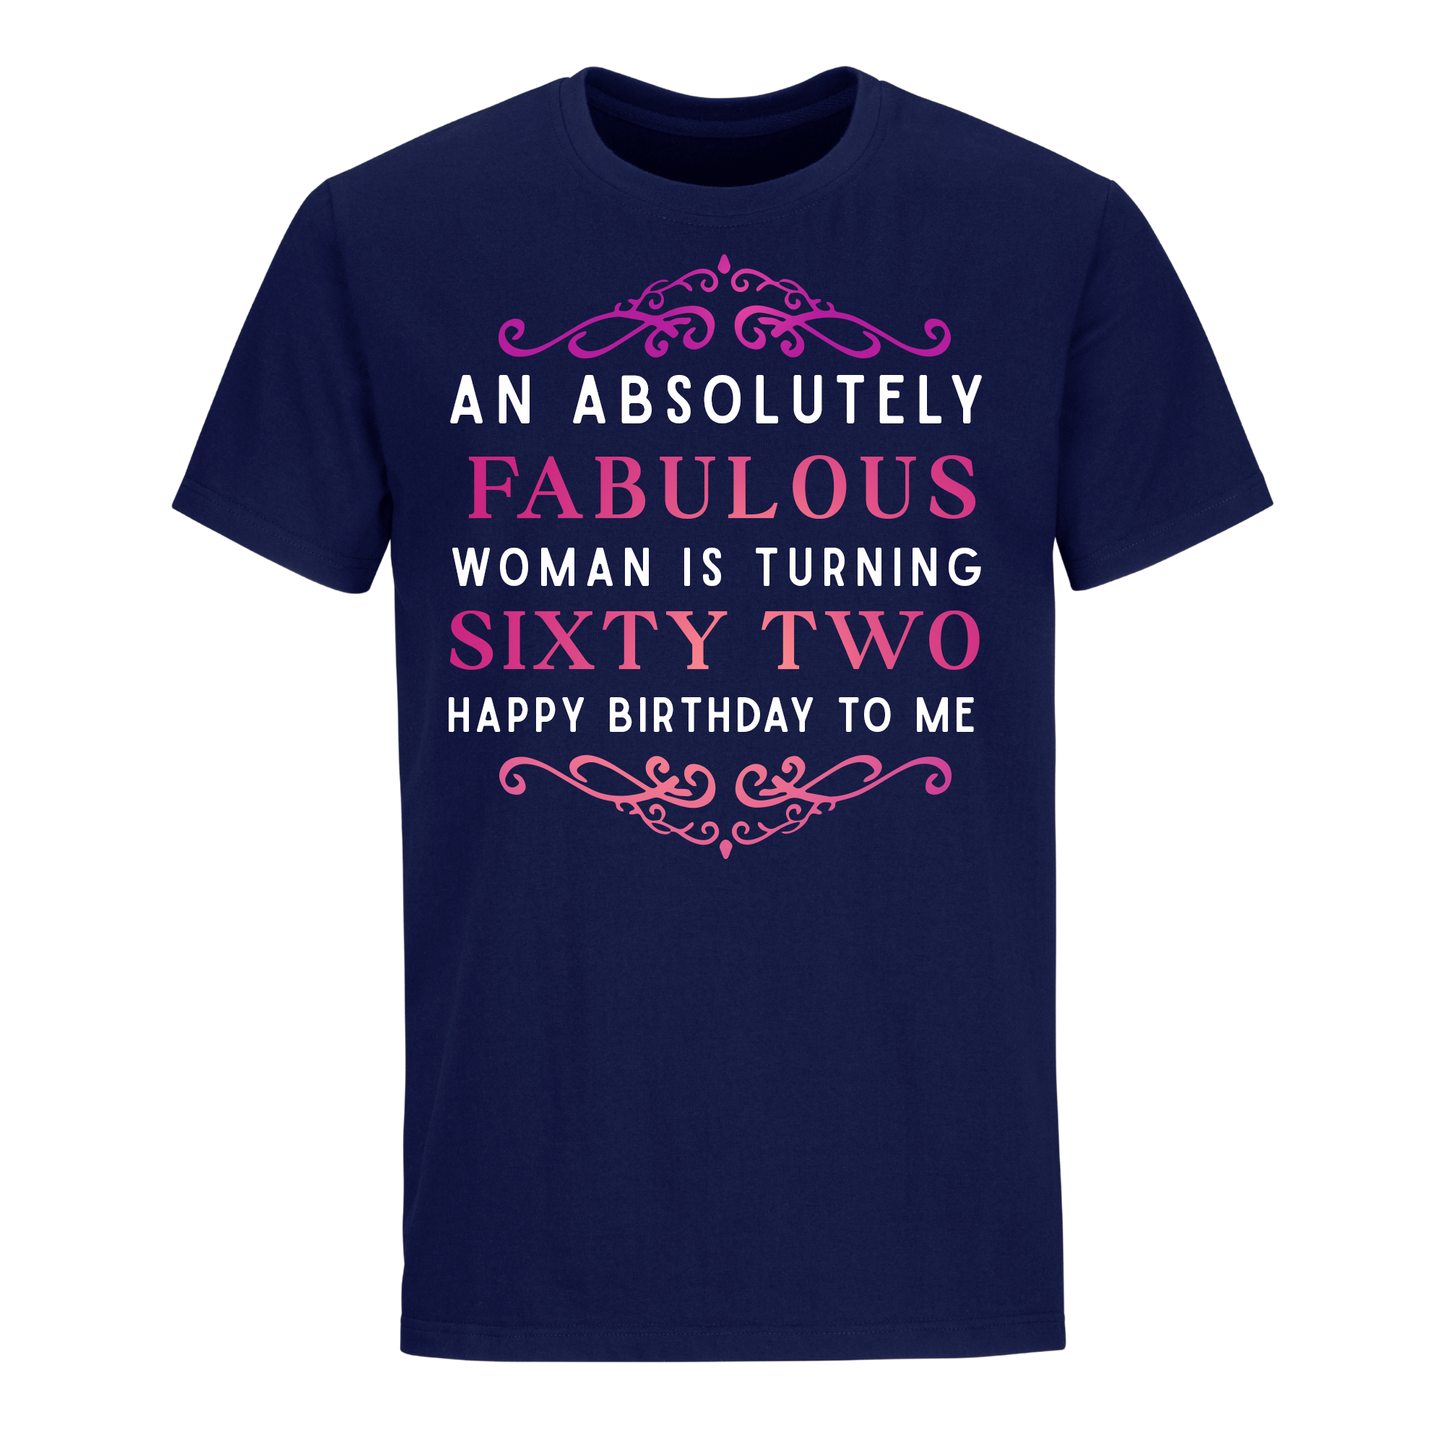 ABSOLUTELY FAB SIXTY TWO  UNISEX SHIRT